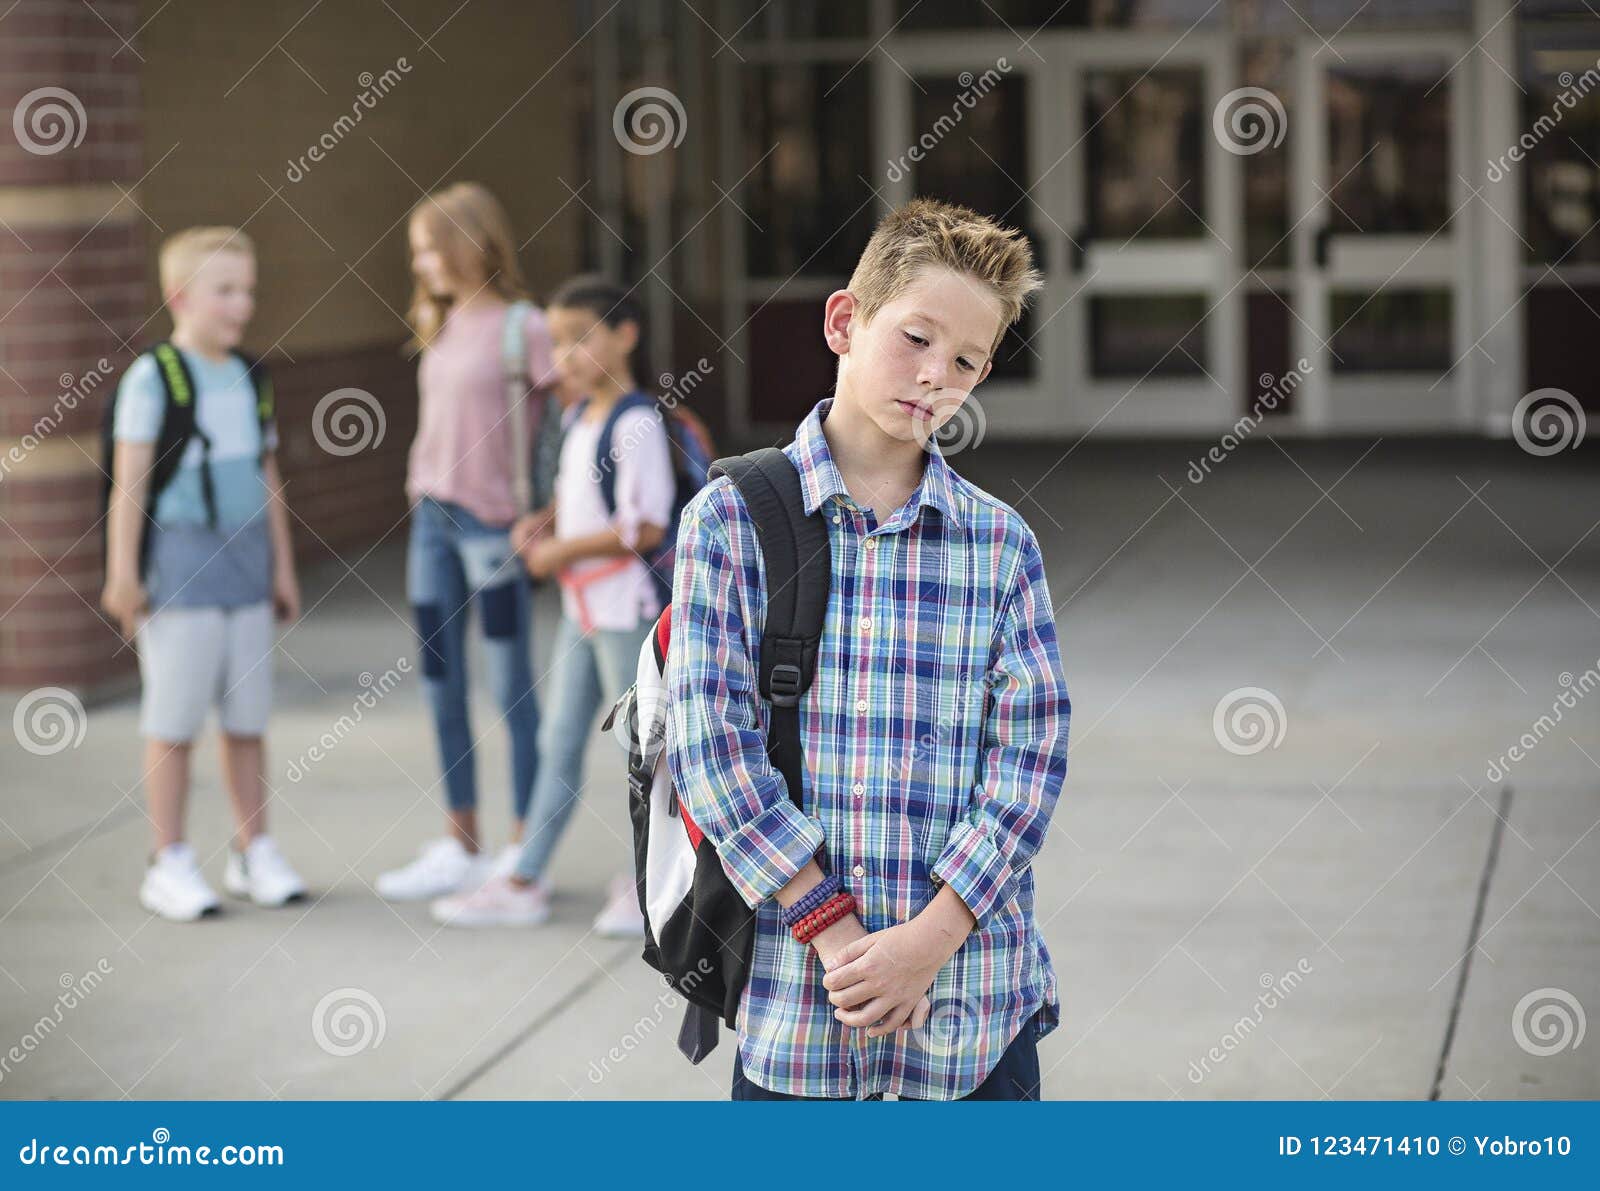 sad boy feeling left out, teased and bullied by his classmates